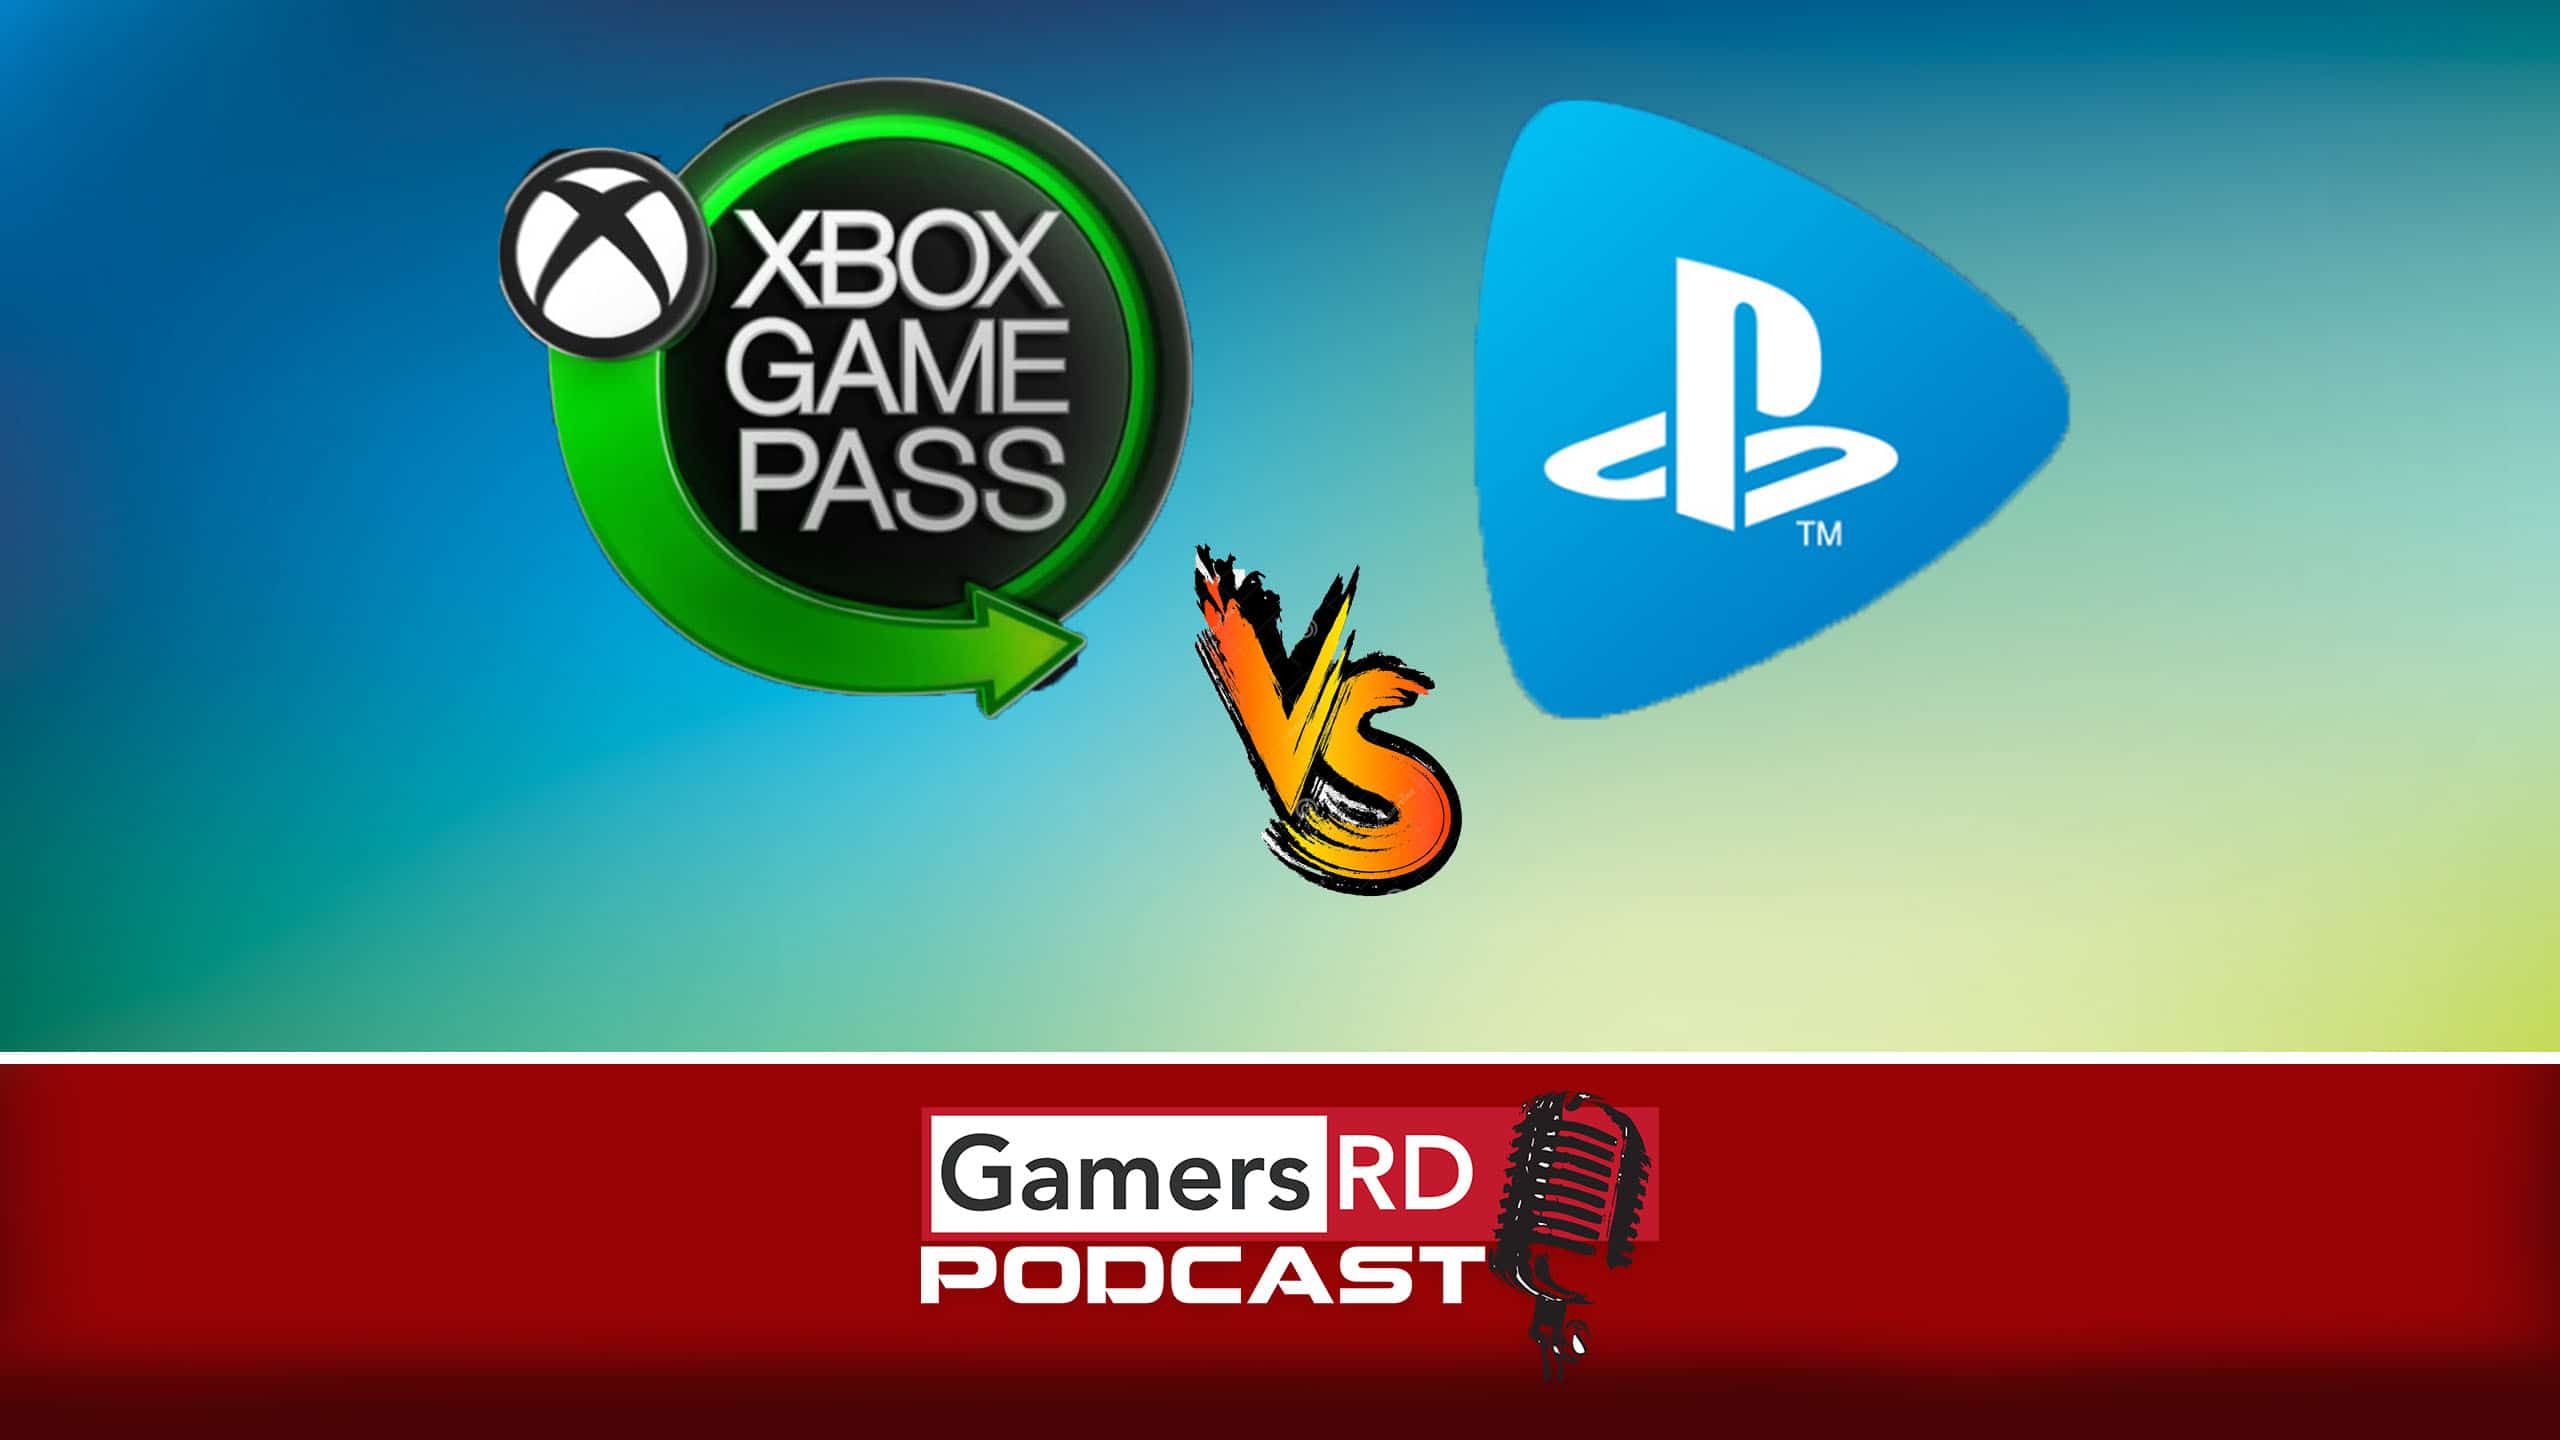 GamersRD Podcast #109 PlayStation Now vs Xbox Game Pass nuestra opinión